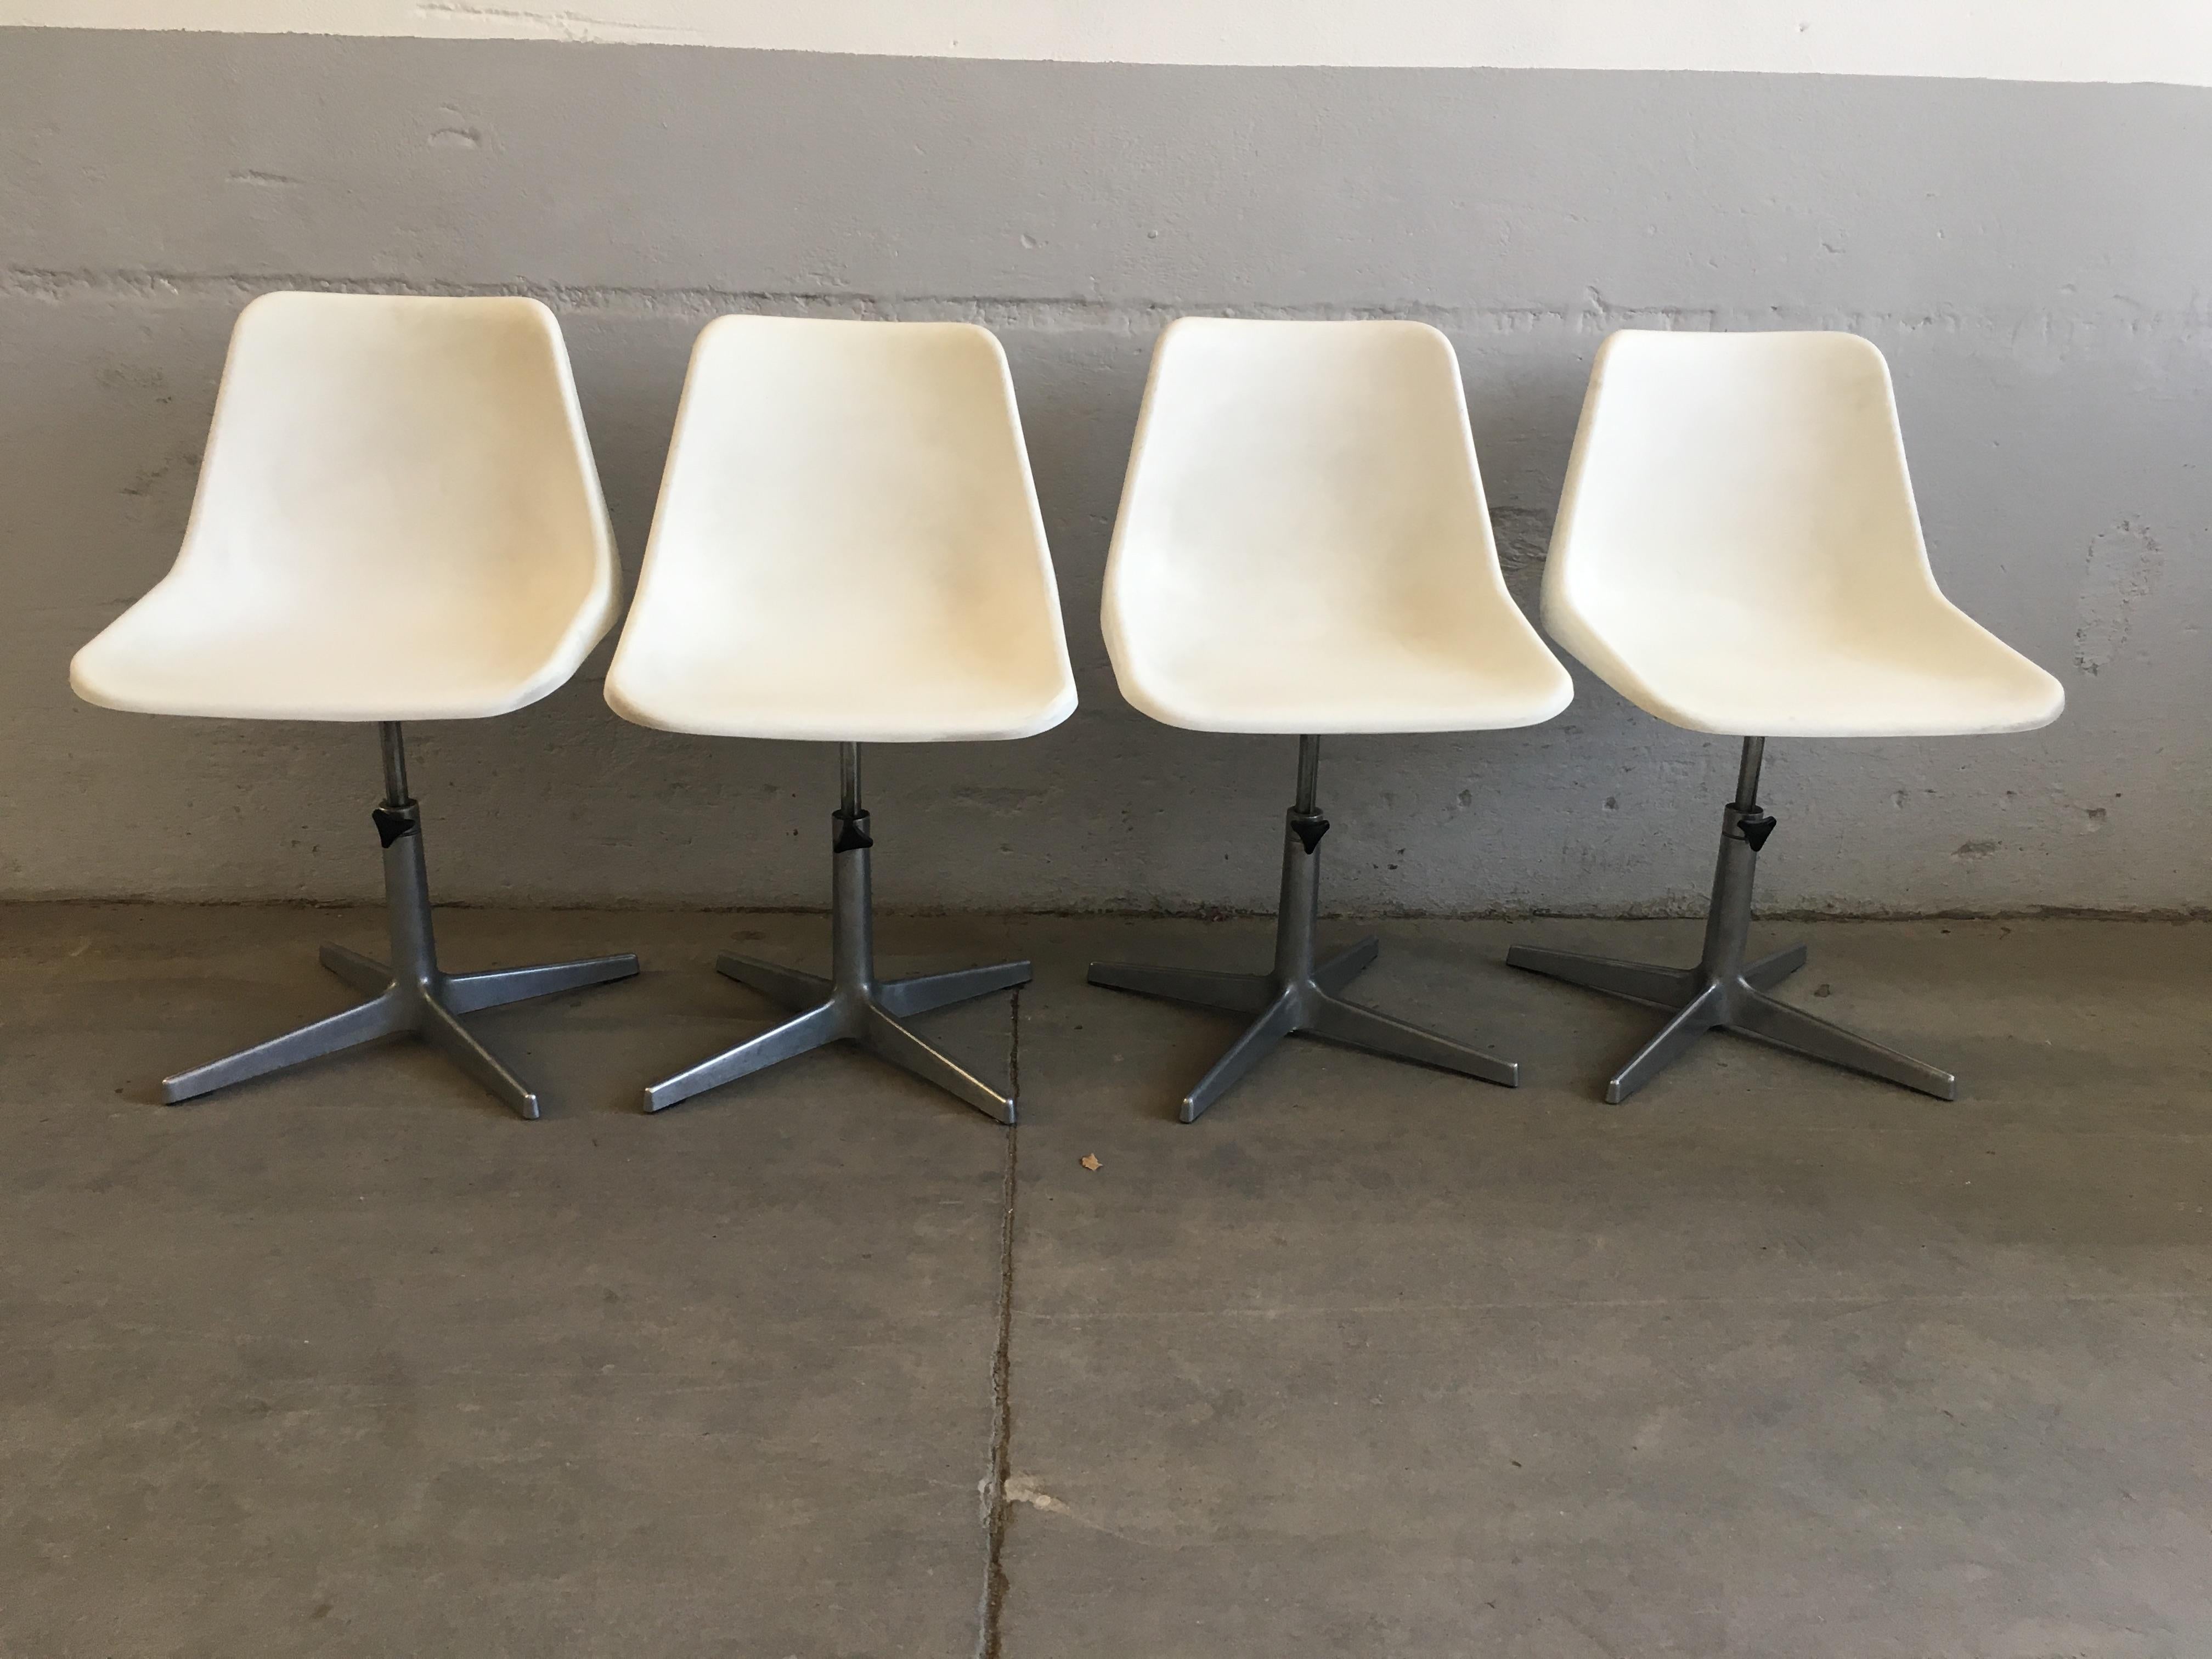 Aluminum Mid-Century Modern Italian Set of 4 Robin Day Rotating Chairs, 1960s For Sale